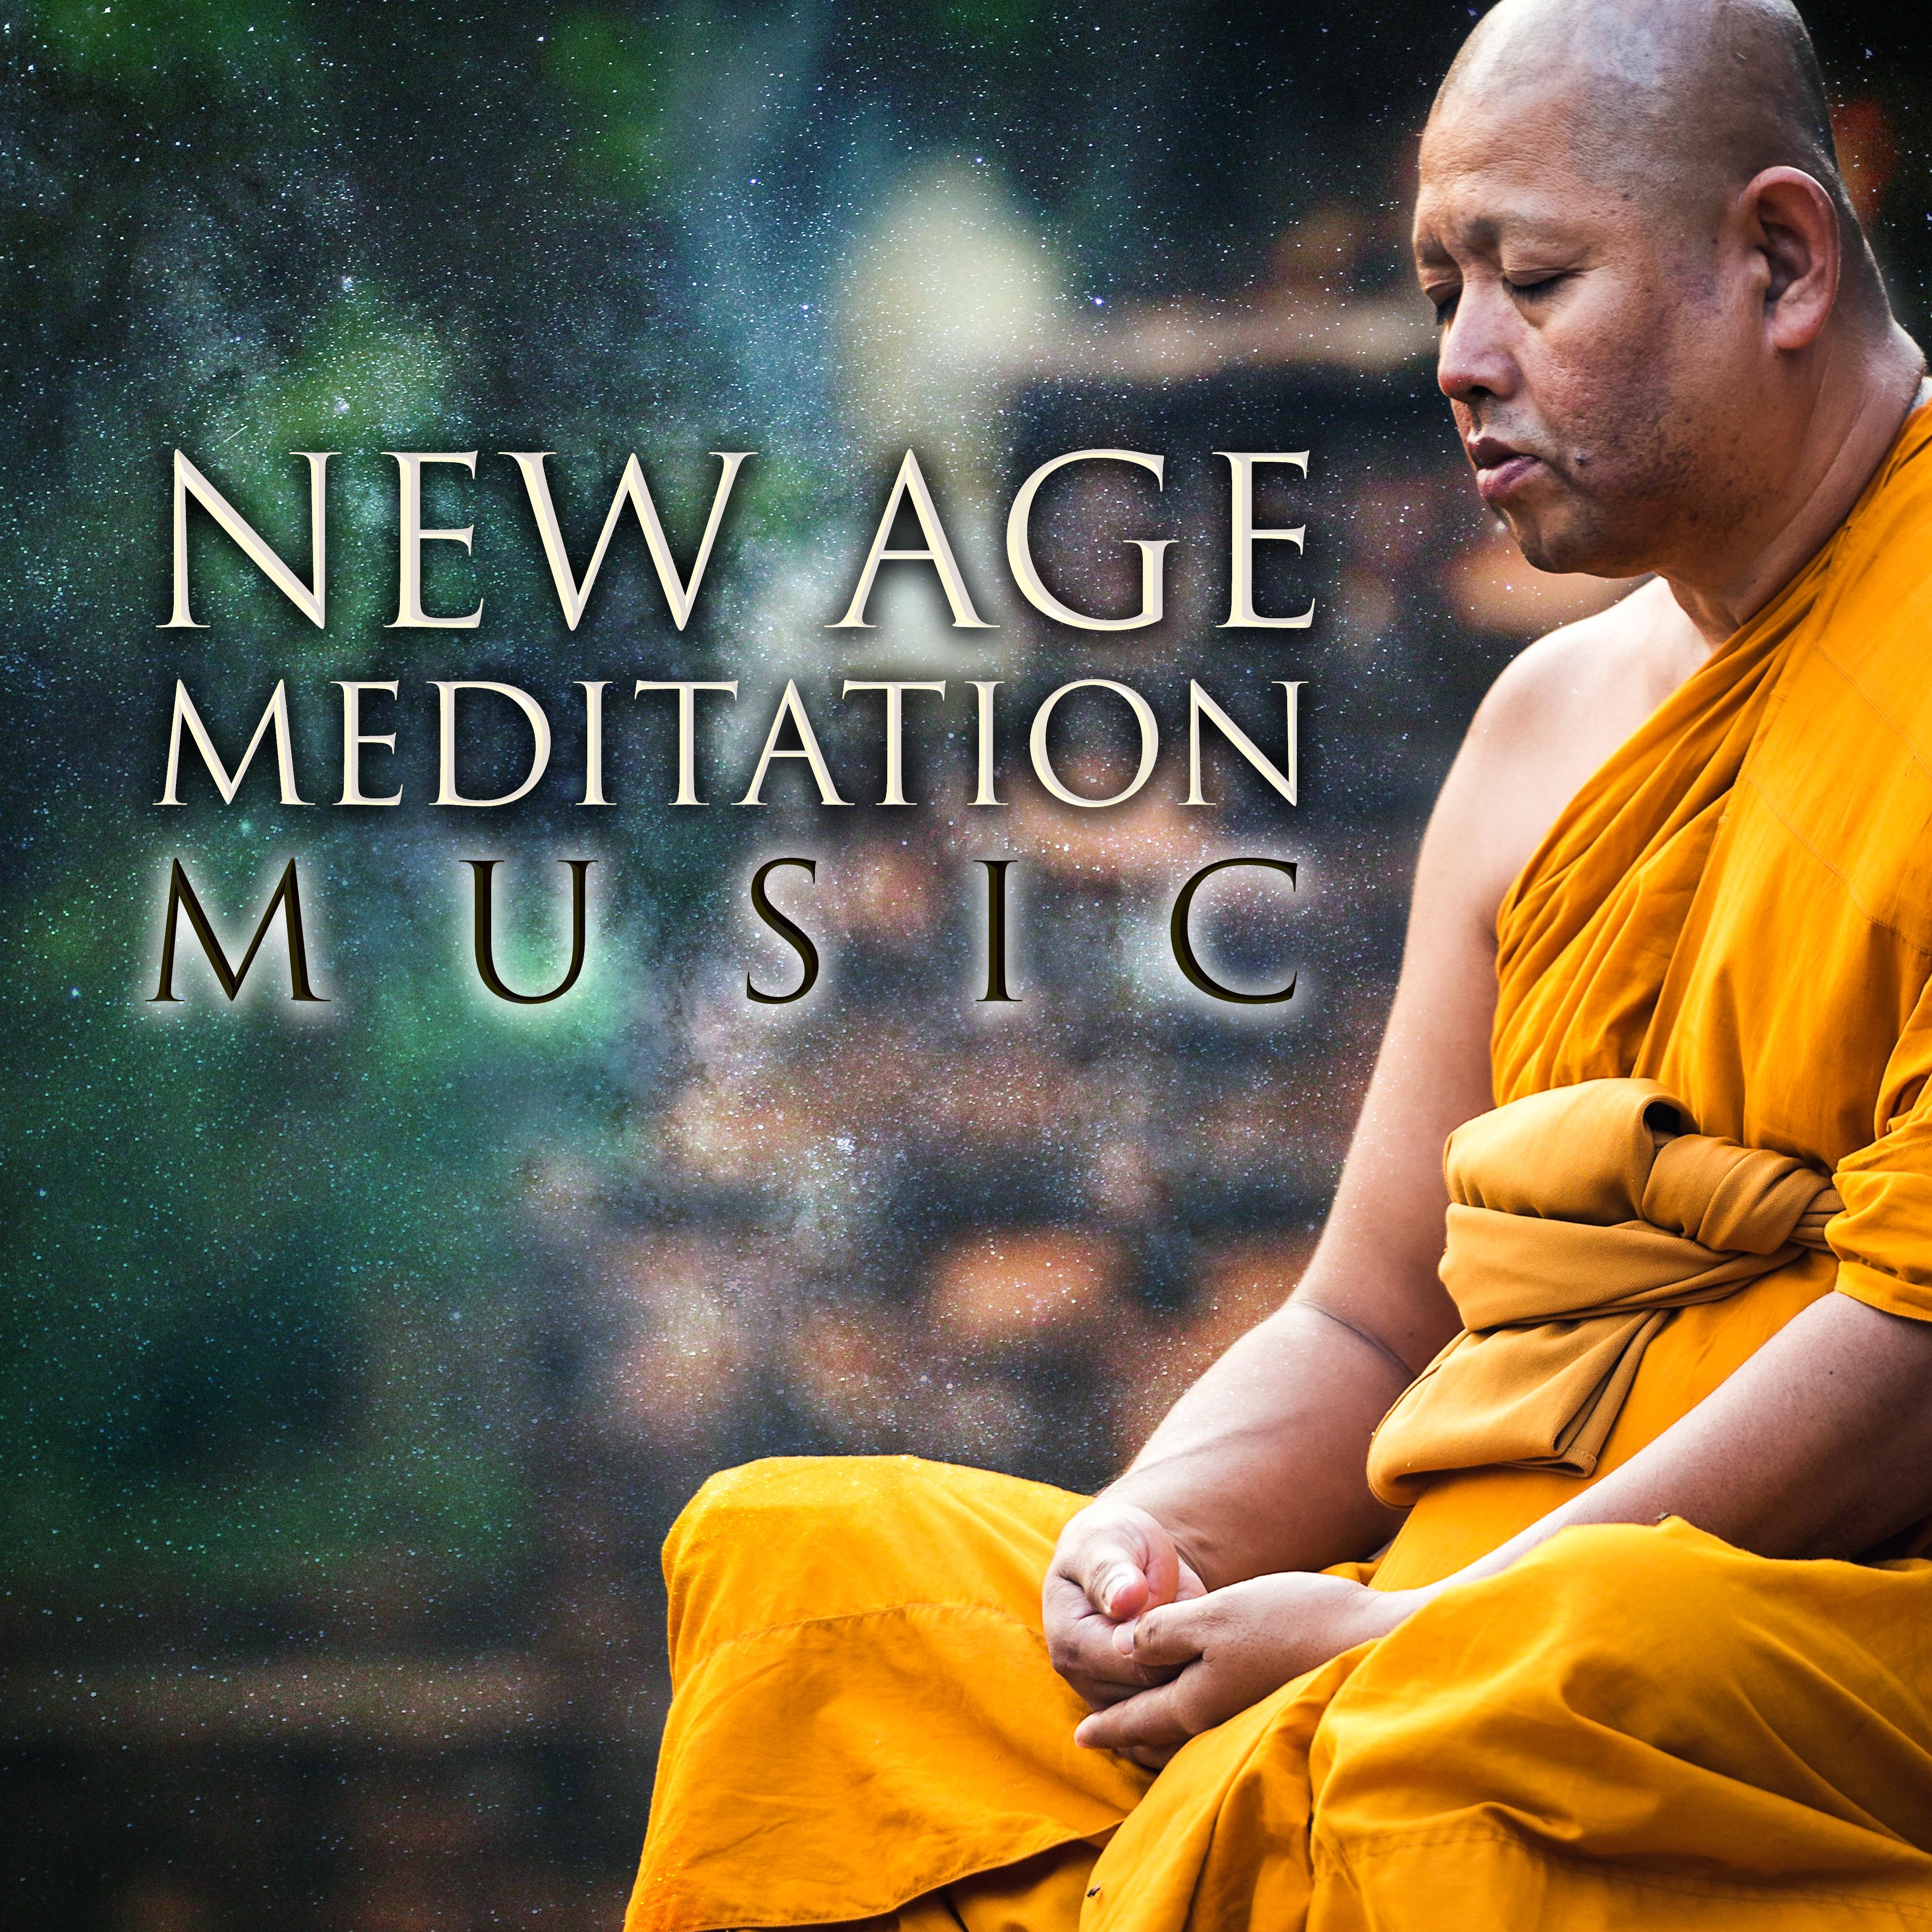 New Age Meditation Music  Soft  Relaxing Sounds, Music to Meditate, Healing Your Soul, Inspirational Melodies